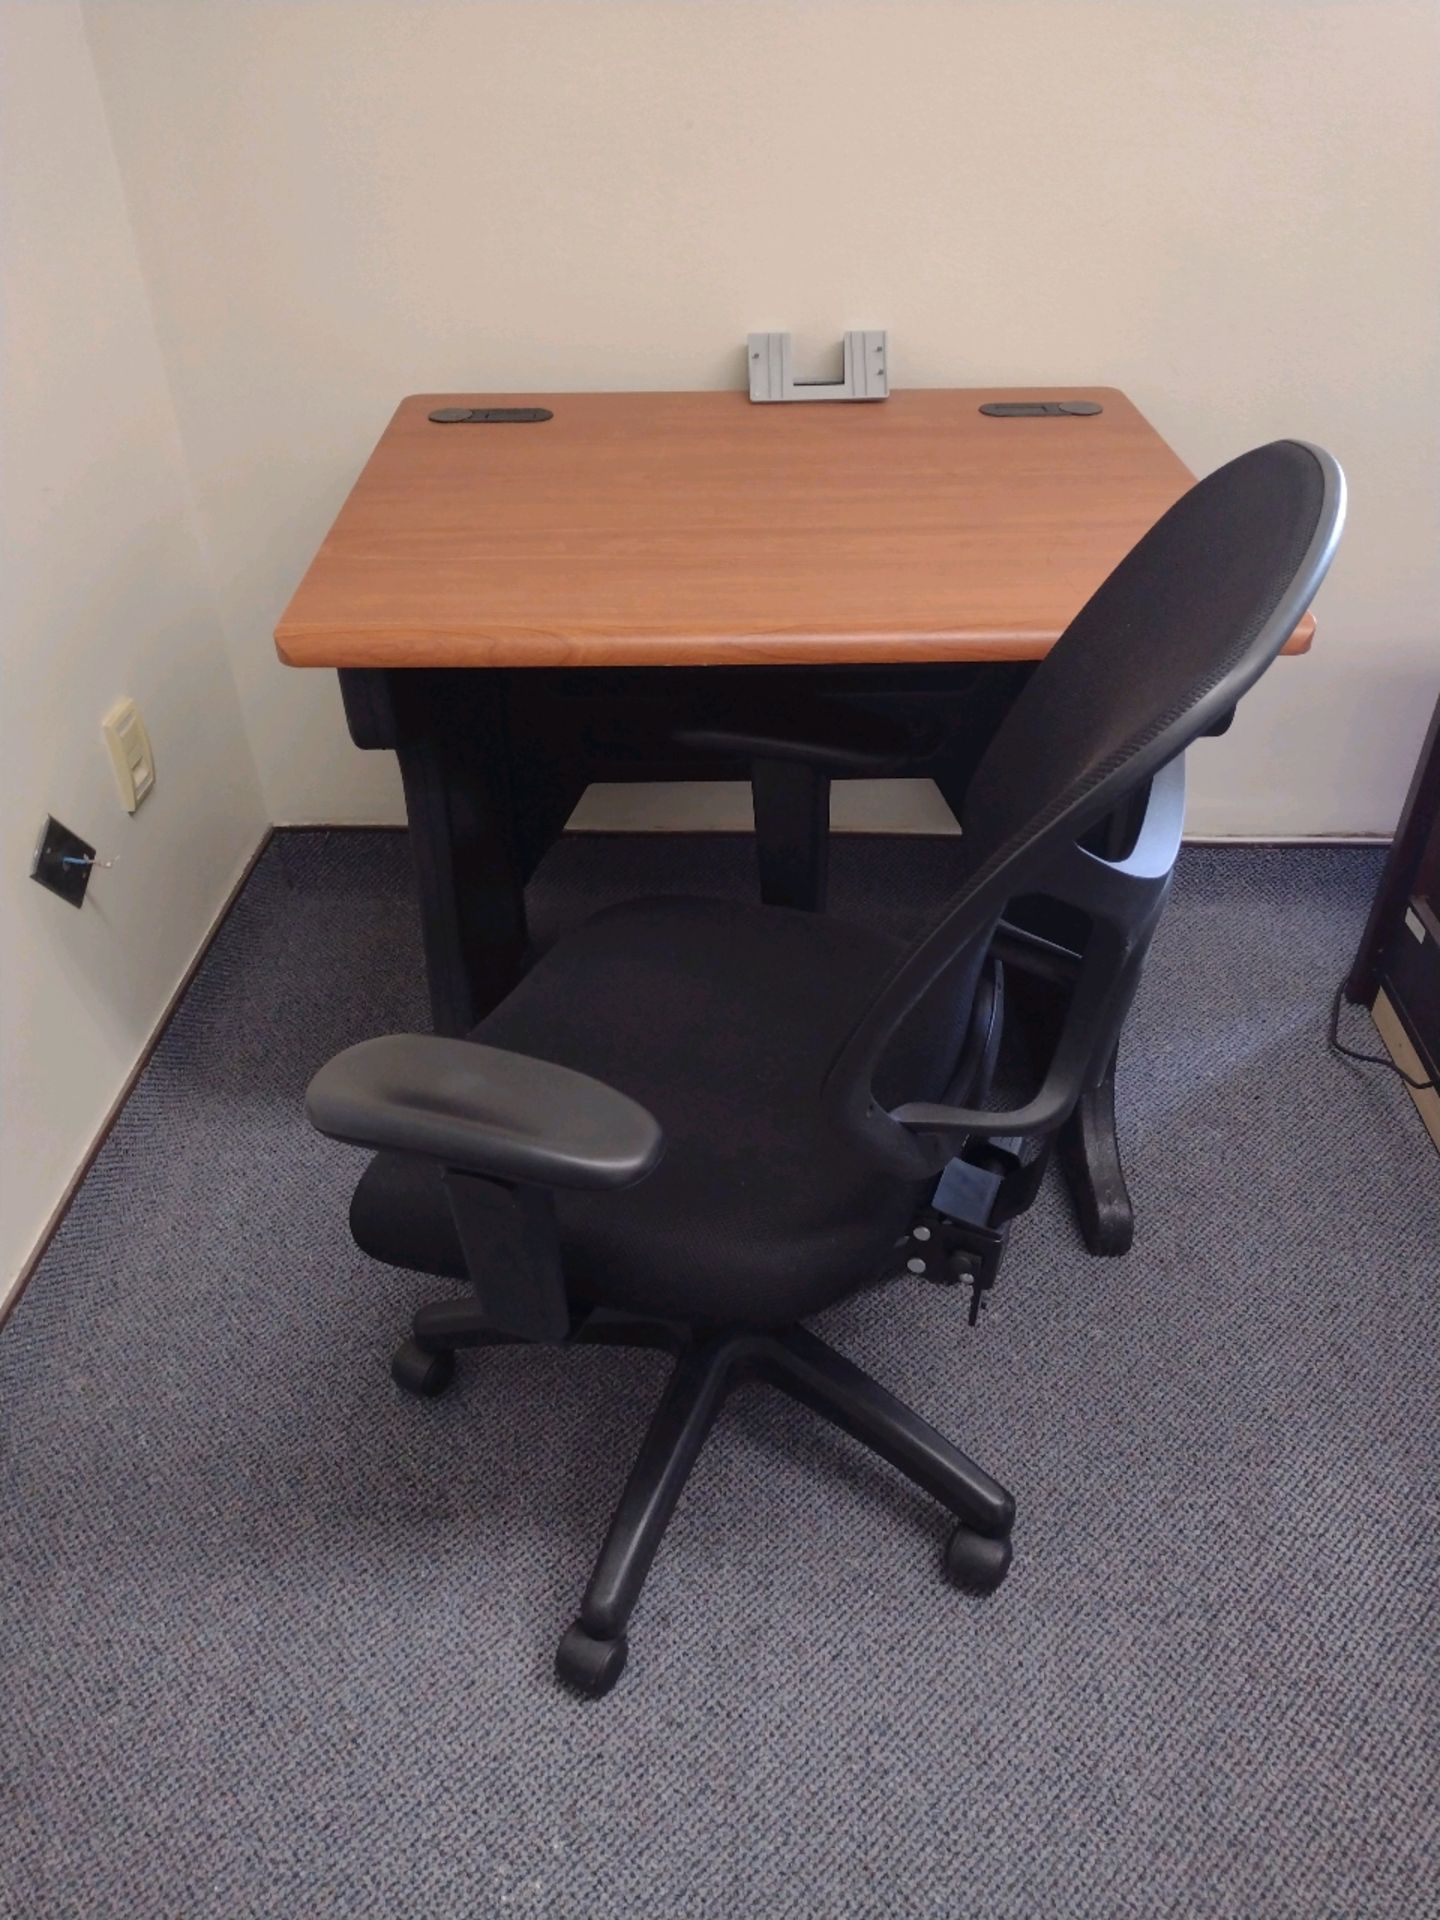 OFFICE TO INCLUDE: 2-DESKS, SIDE TABLE, TASK CHAIR, BOOKCASE AND 2- MONITORS - Bild 5 aus 5